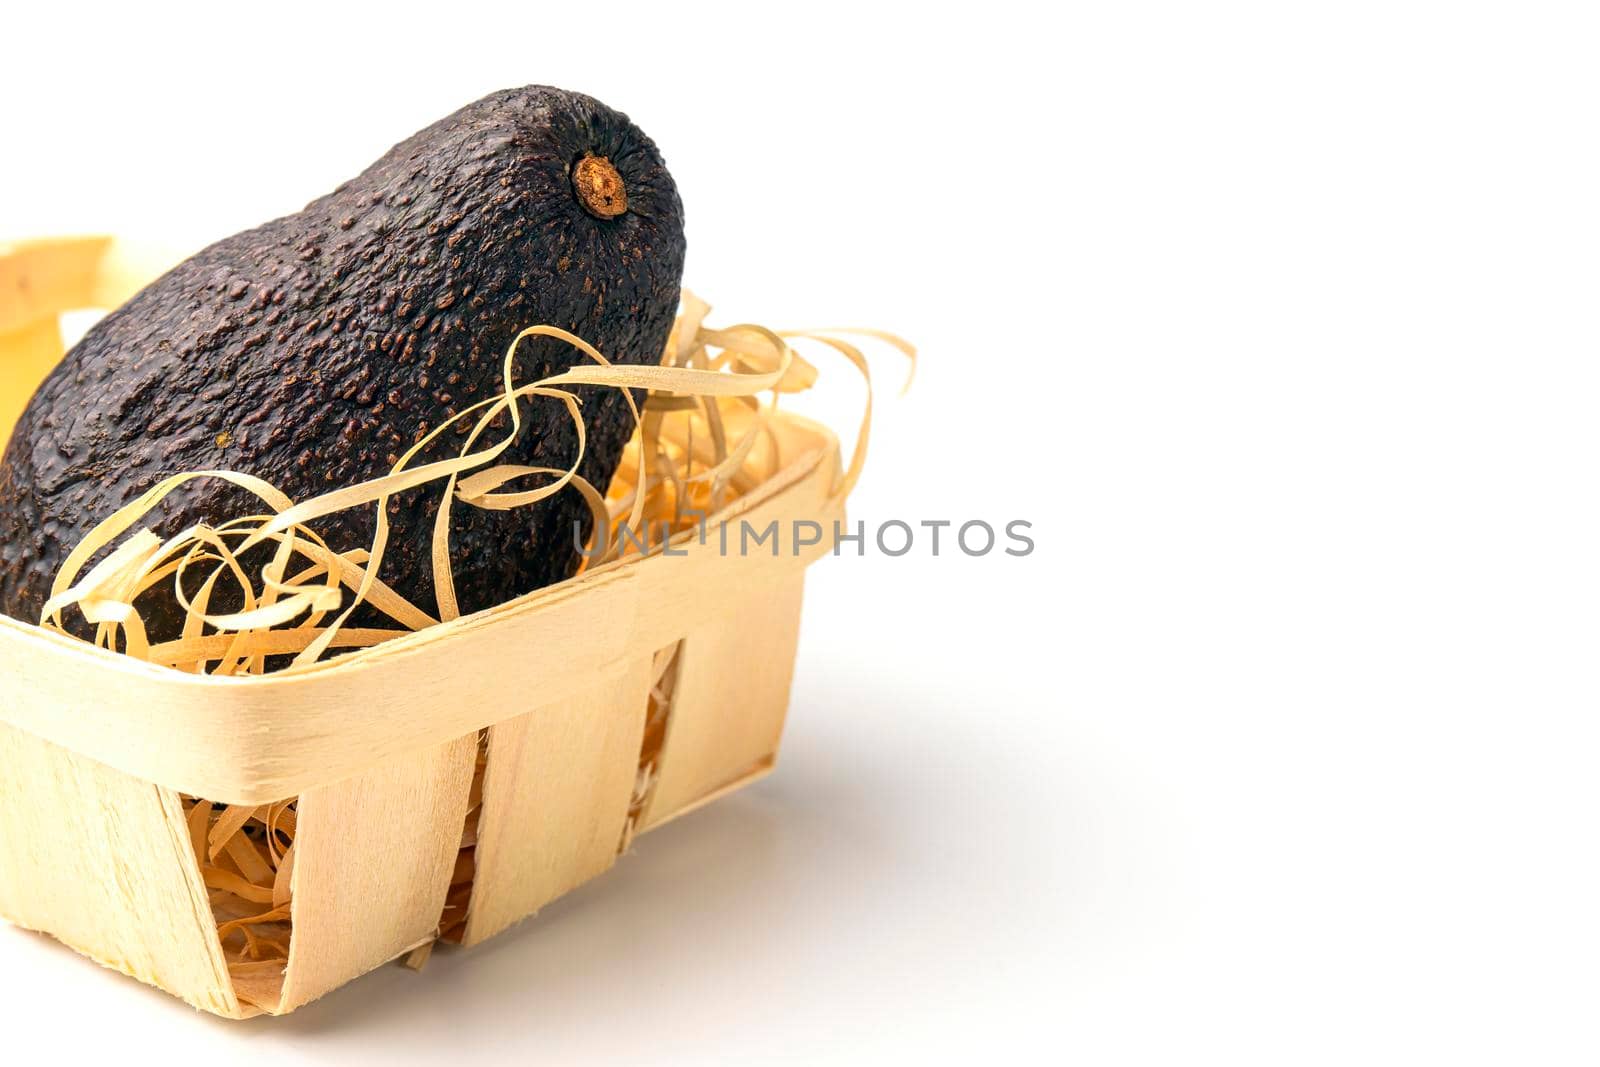 avocado in a basket on a white background close-up. isolate by roman112007